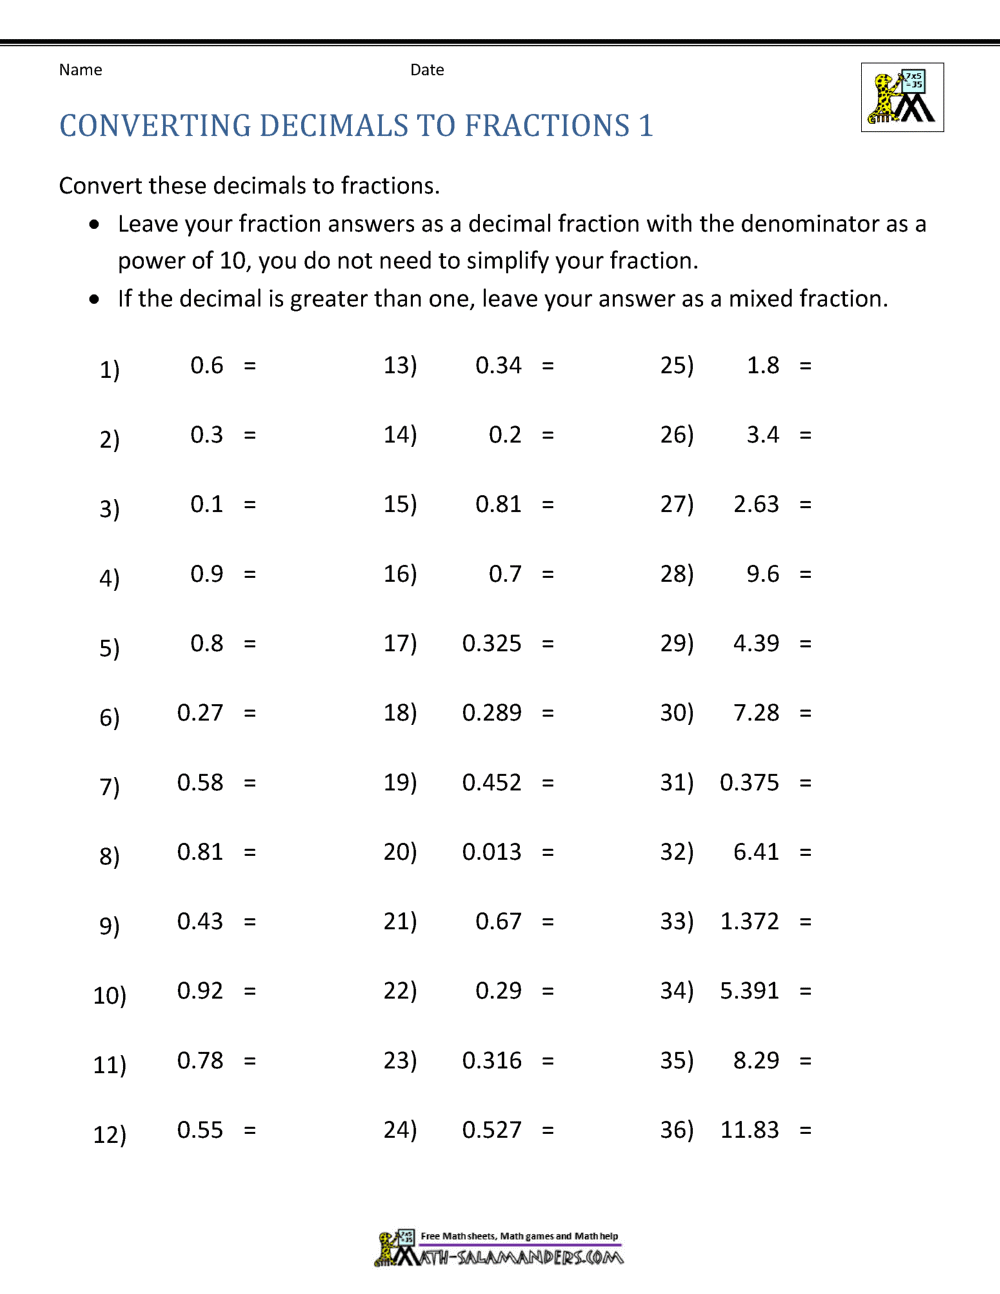 my homework lesson 5 decimals and fractions answer key